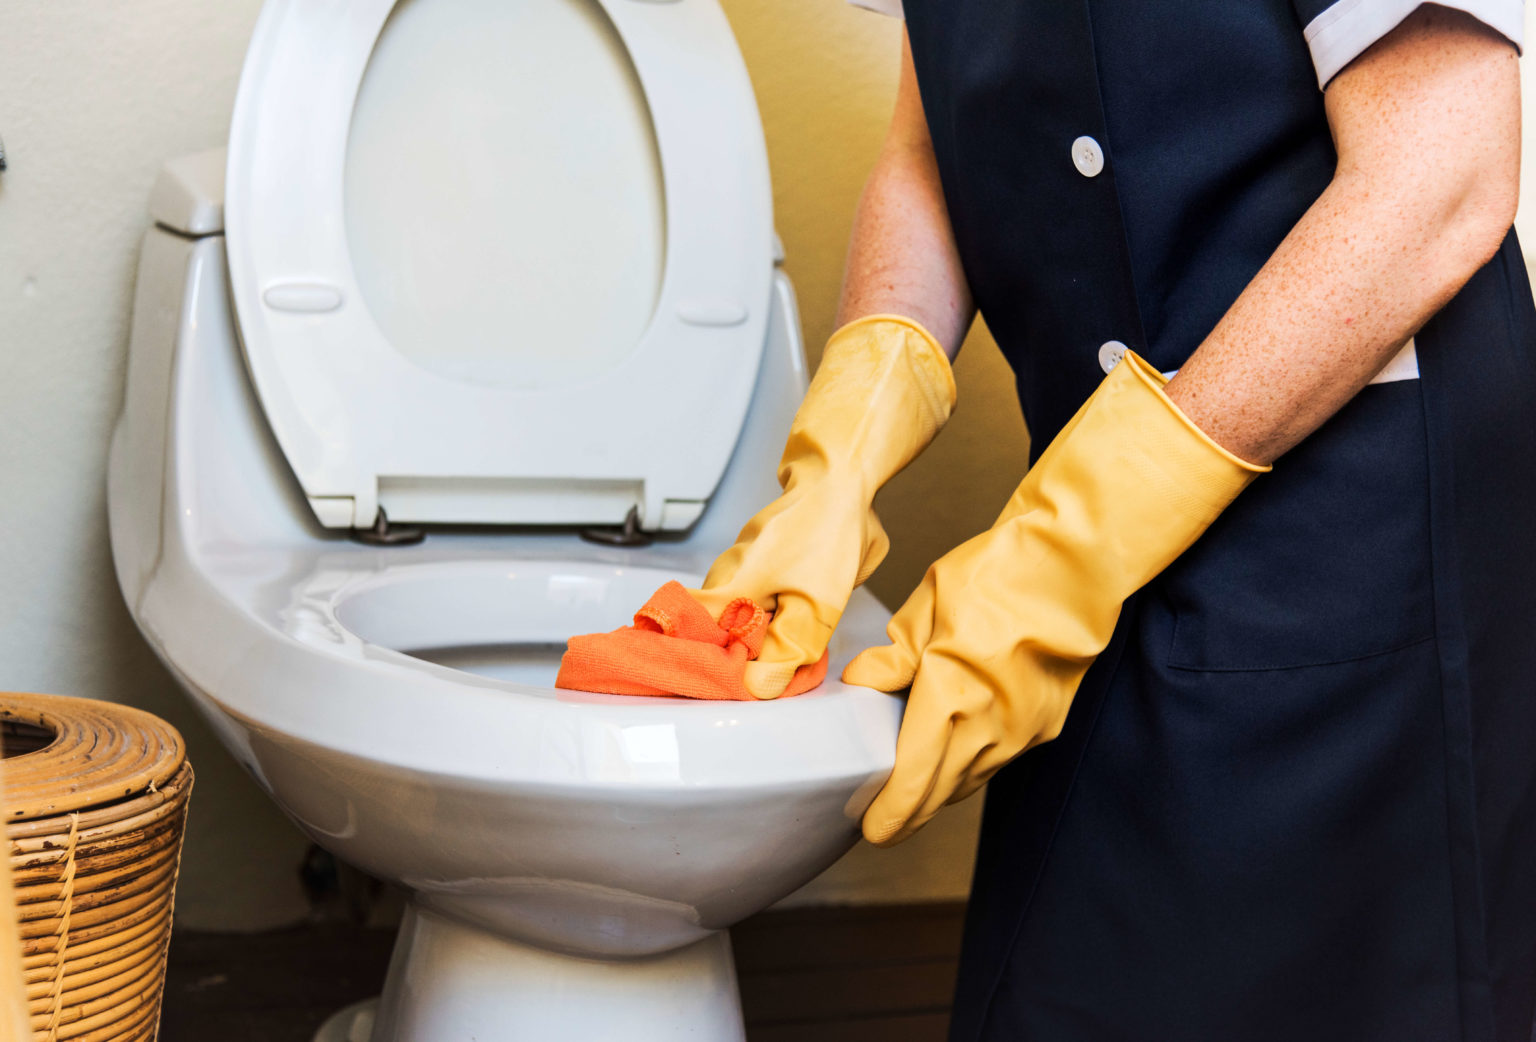 Clogged Pipes Clogged Toilet Bathroom Flushing Stock Photo